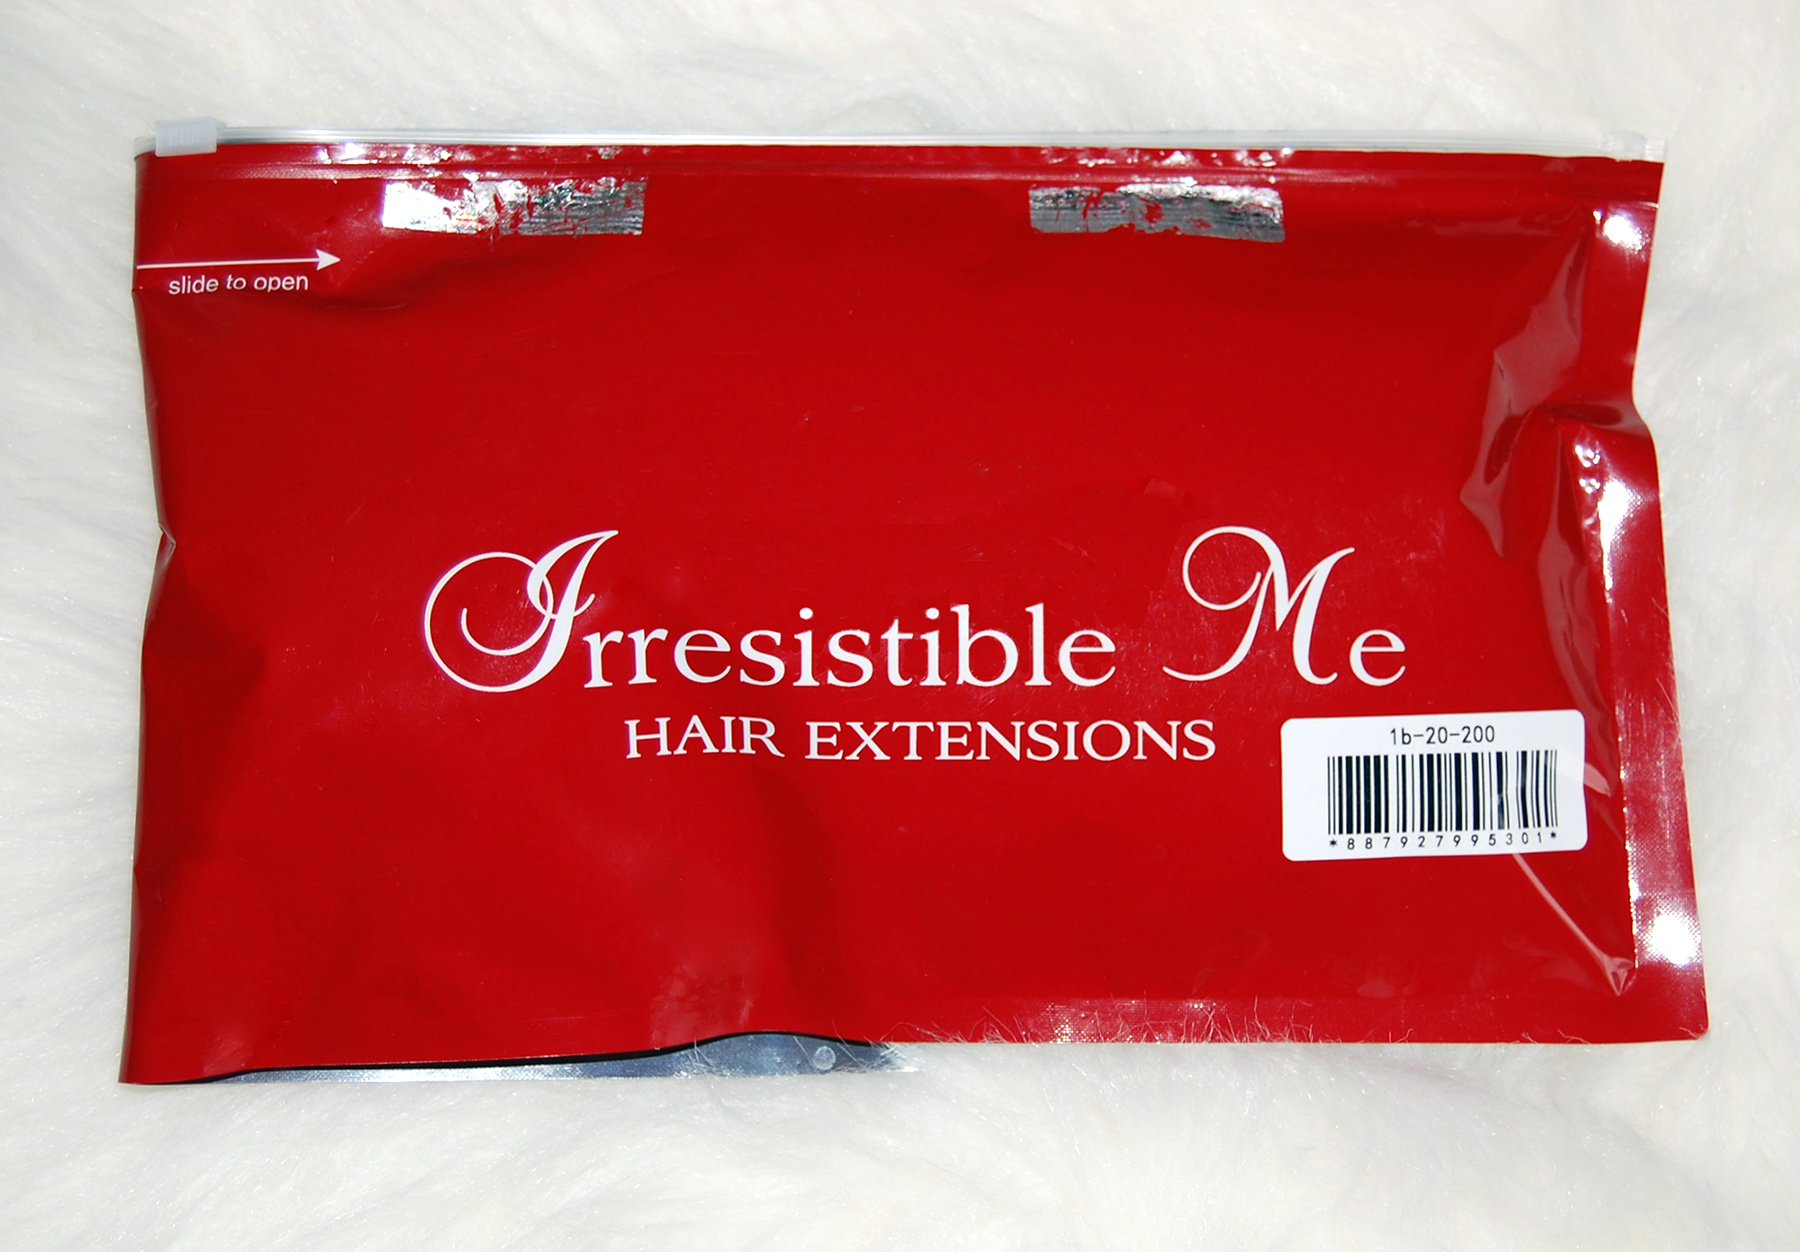 Irresistible Me Hair Extensions Review - All In The Blush